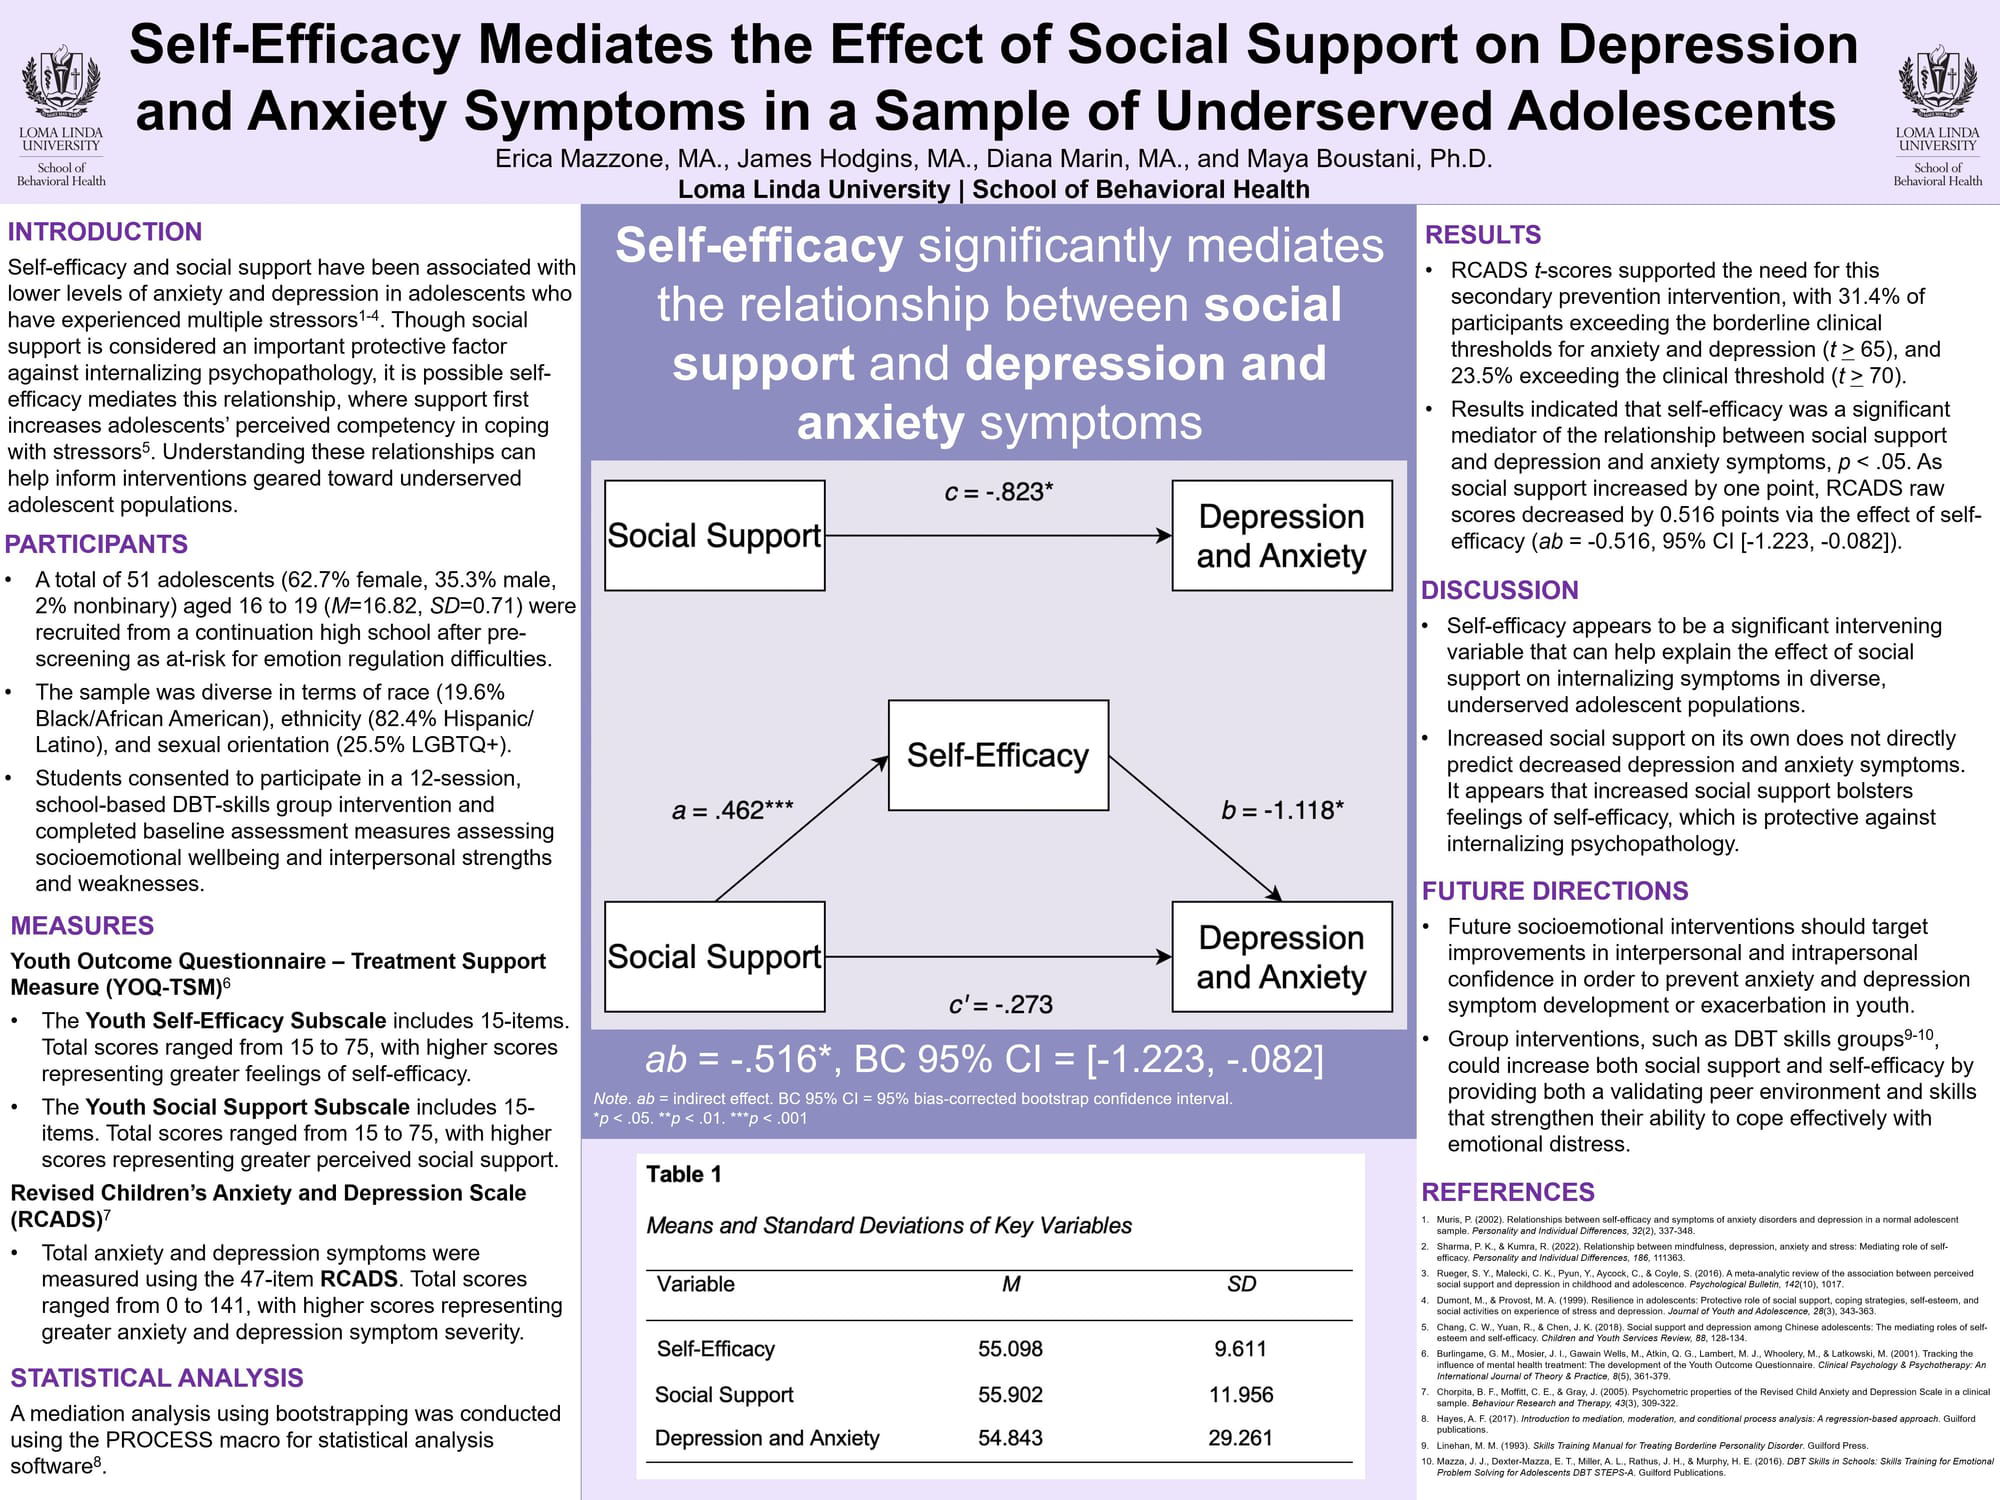 Self-Efficacy Mediates the Effect of Social Support on Depression and Anxiety Symptoms in a Sample of Underserved Adolescents